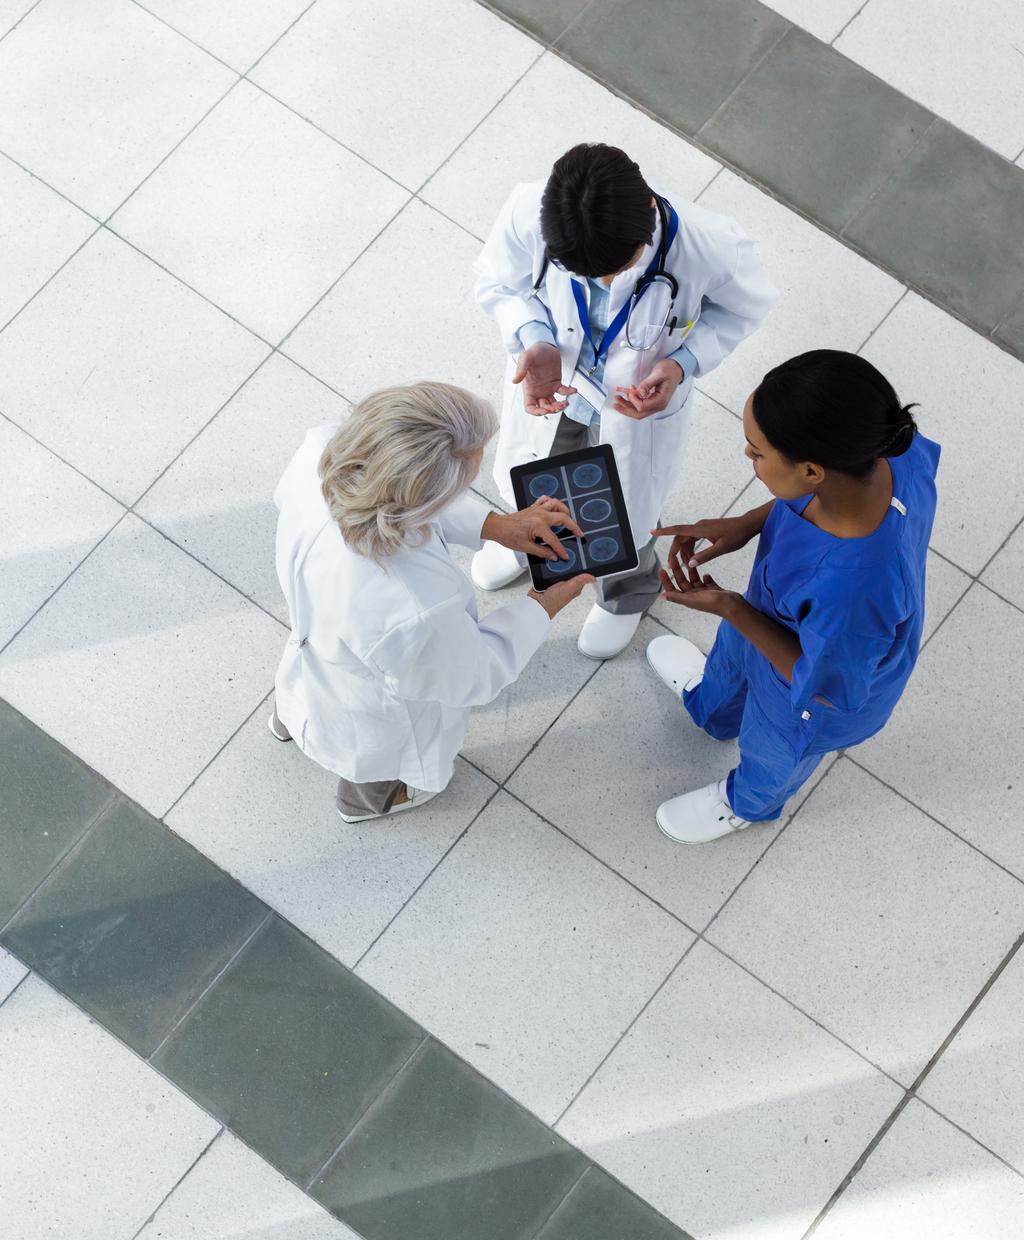 SPONSORED BY WHITE PAPER MOBILIZING HEALTHCARE WITH VMWARE AND GOOGLE Mobility plays a significant role